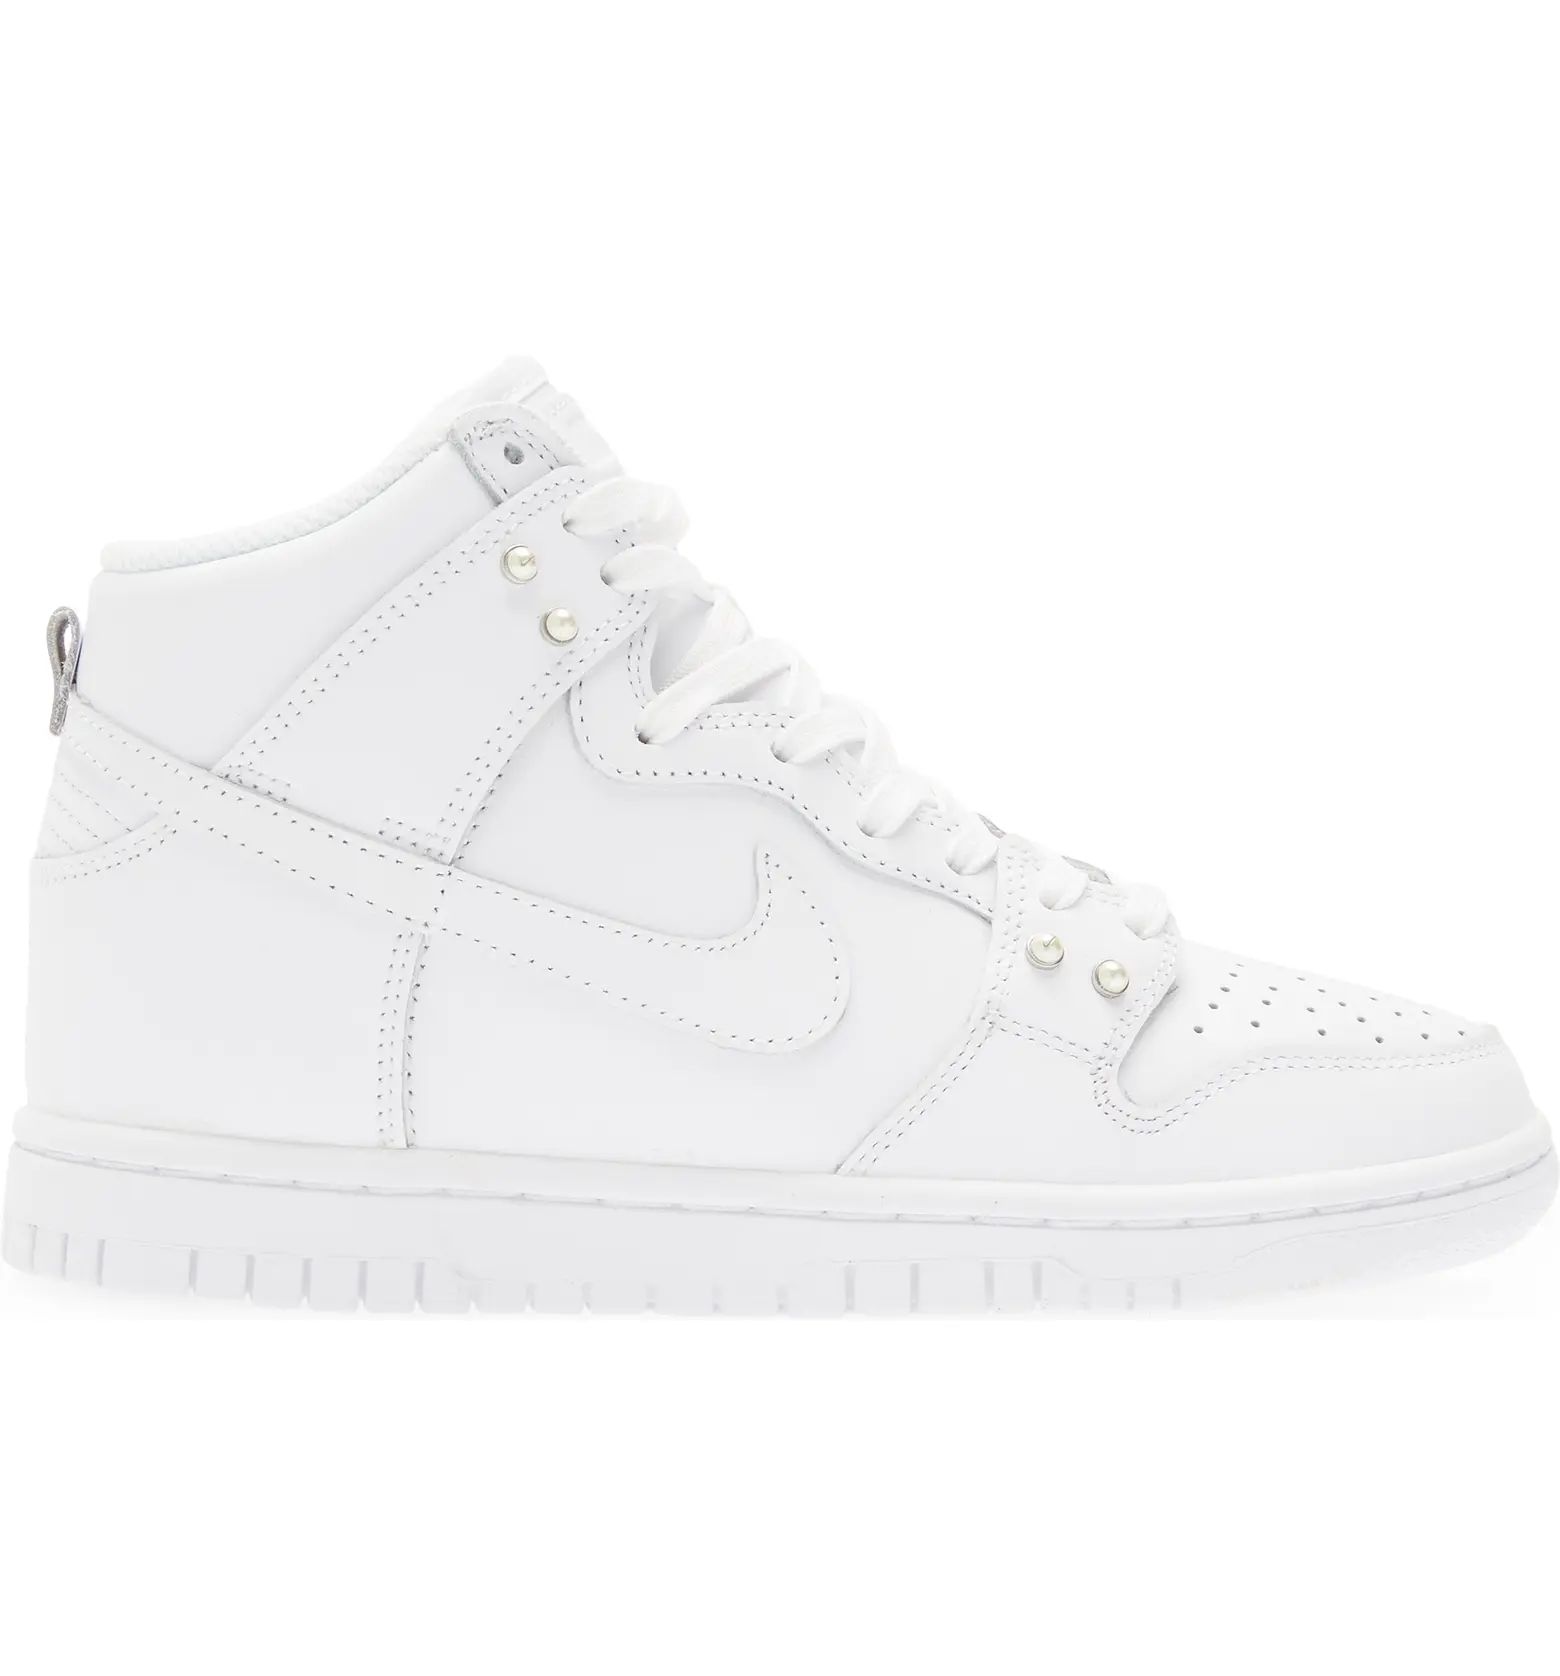 Nike Dunk High Top Sneaker Special Edition | Nordstrom | Nordstrom